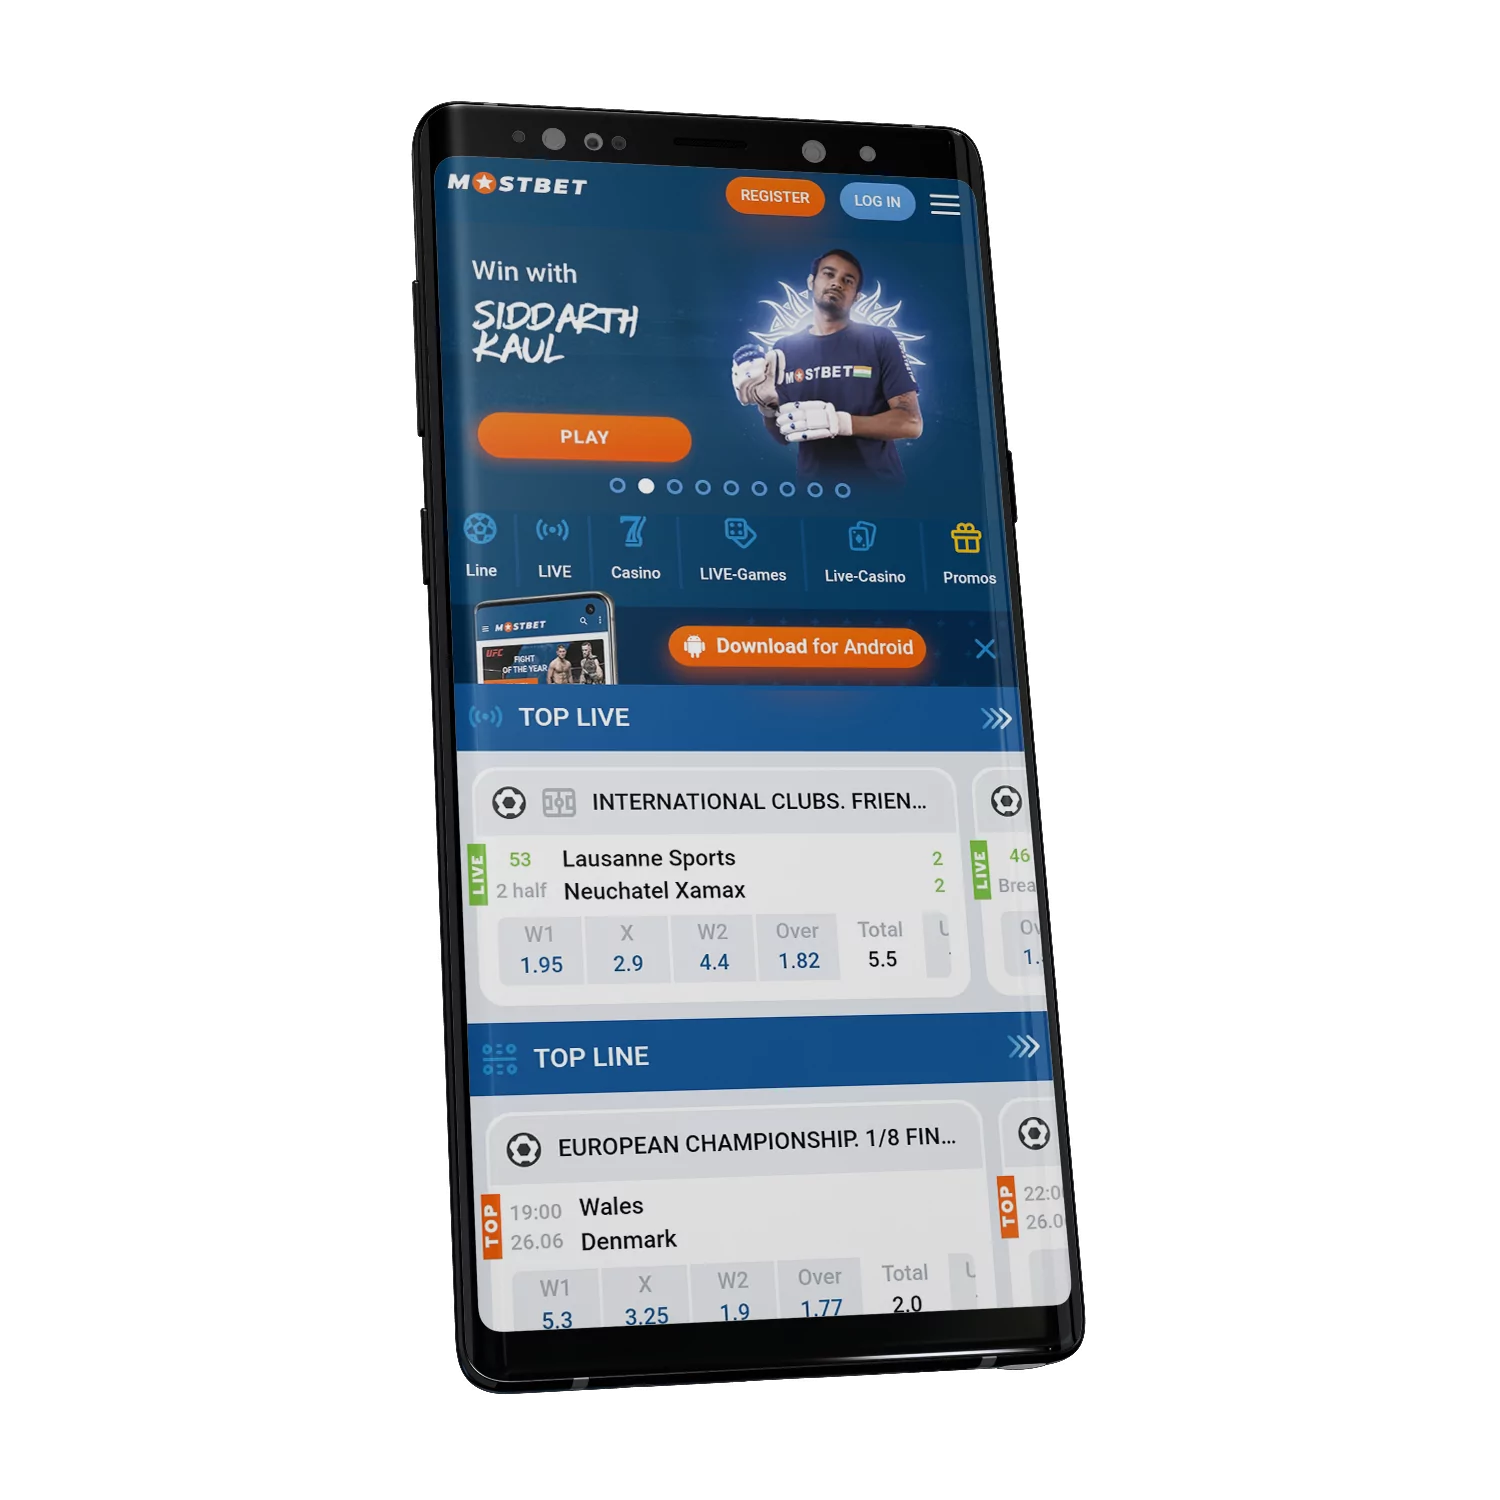 Learn more about how to download and install the Mostbet app.